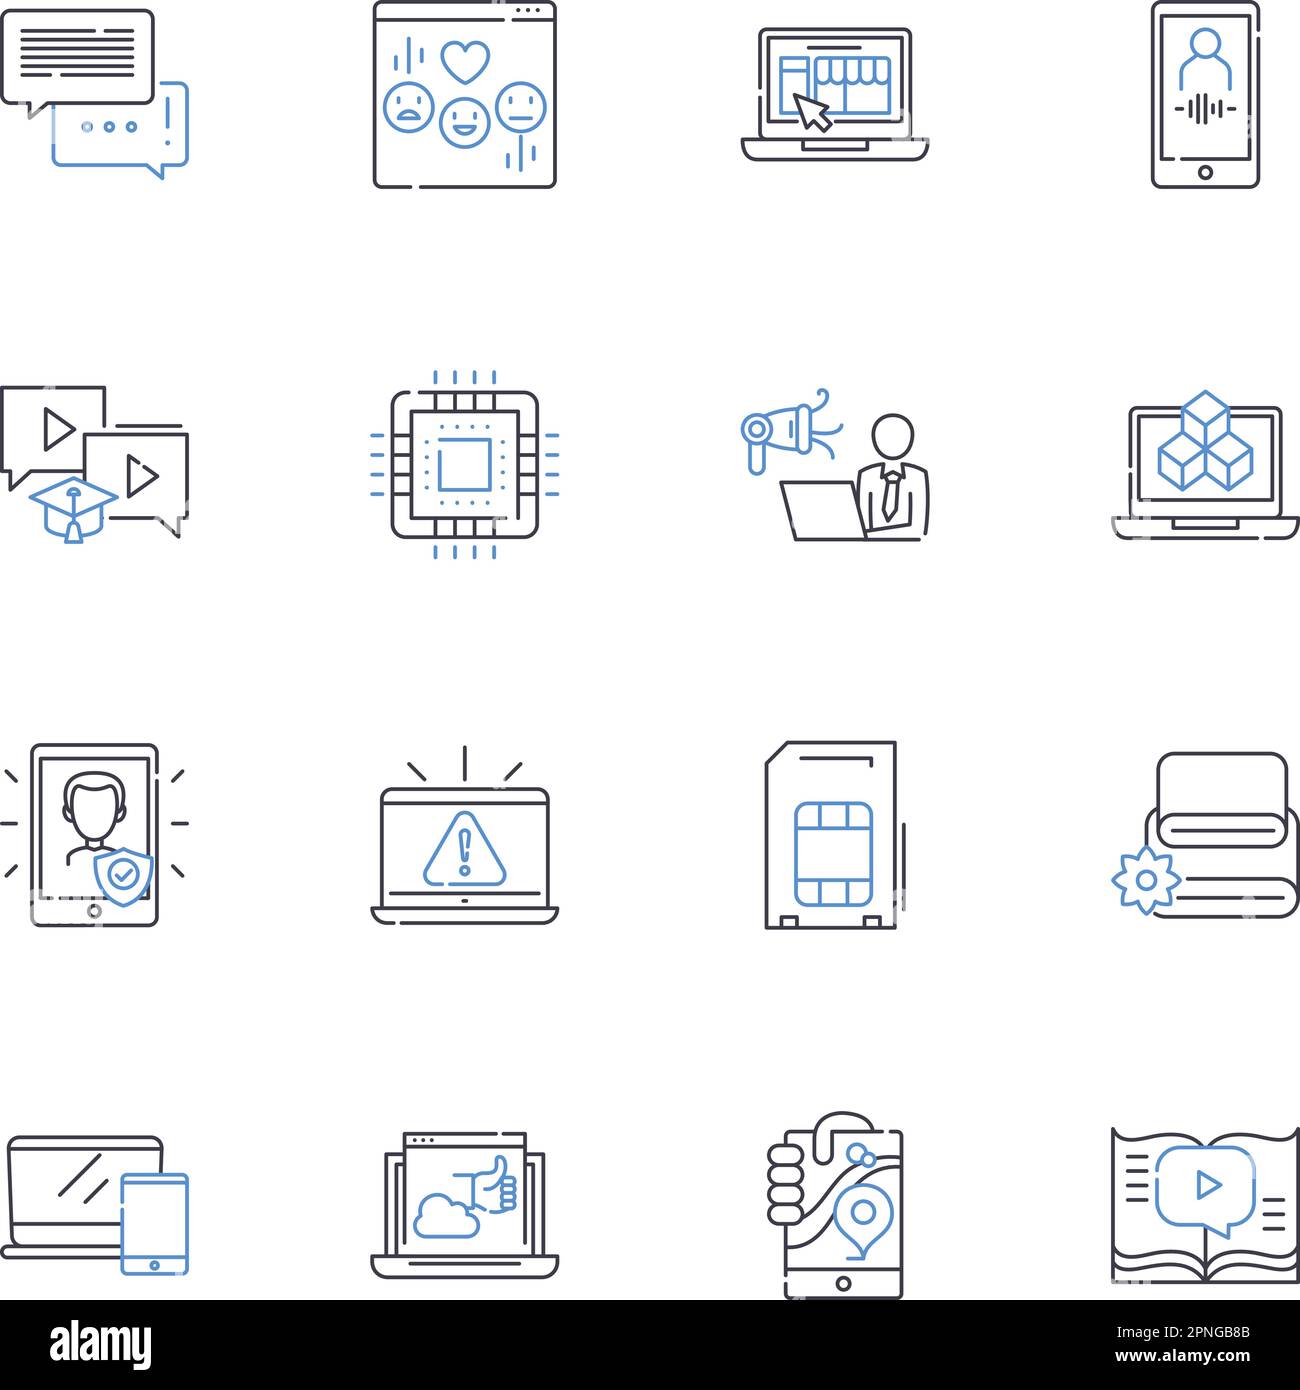 Bayesian Nerks line icons collection. Probabilistic, Machine Learning, Statistics, Artificial Intelligence, Algorithms, Optimization, Modeling vector Stock Vector